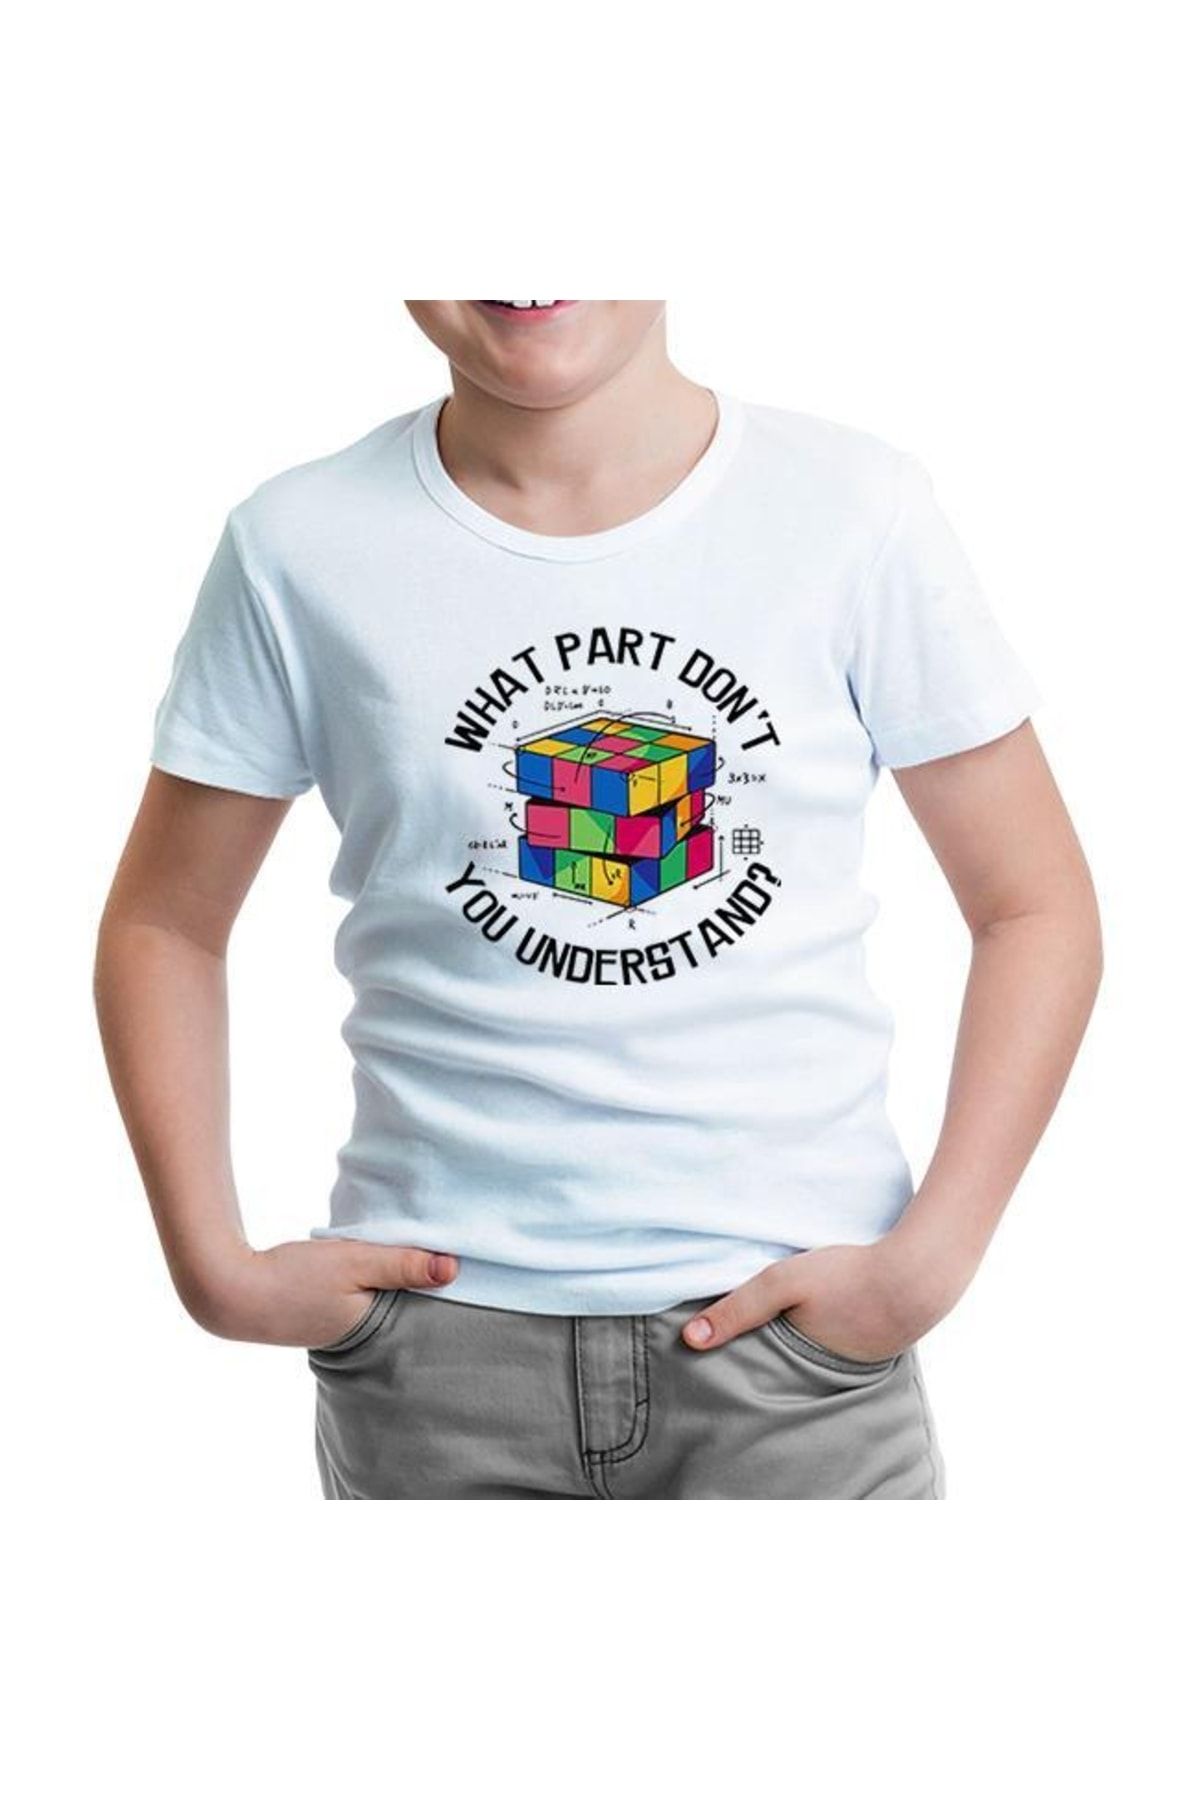 Lord T-Shirt Puzzle Cube With Calculations Beyaz Çocuk Tshirt